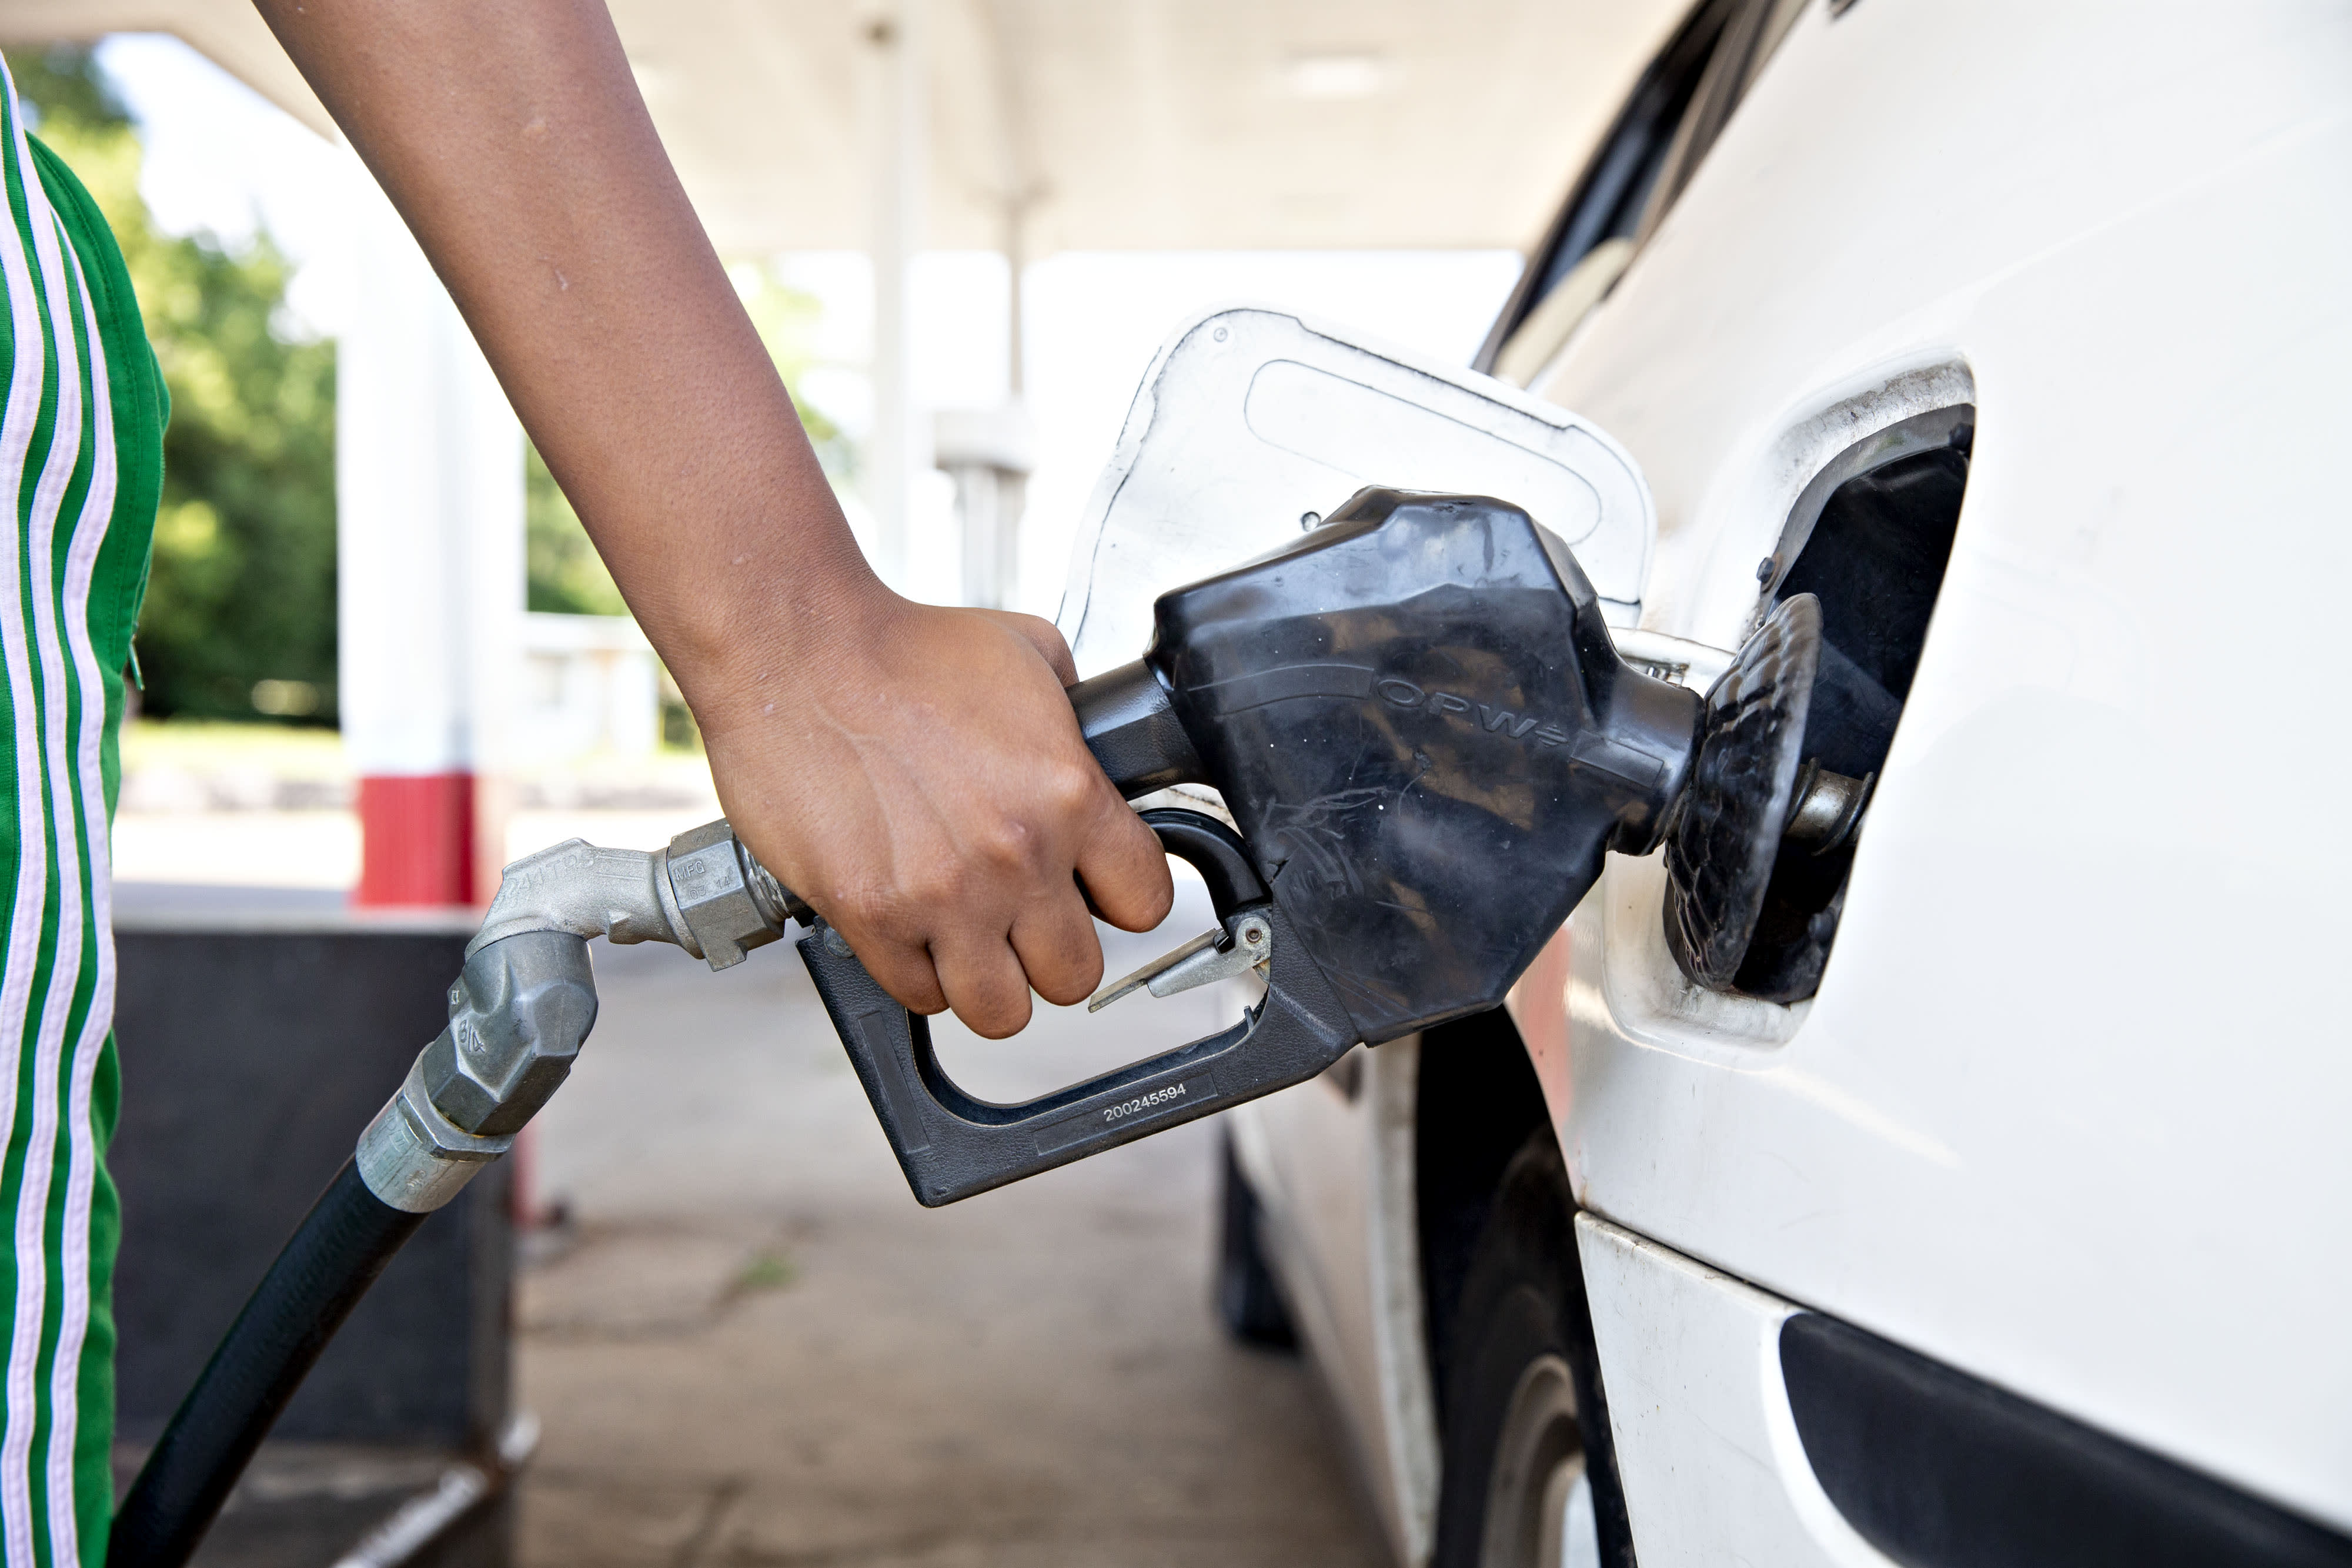 Gas prices have spiked amid the Russia-Ukraine conflict. Here are tips for saving at the pump